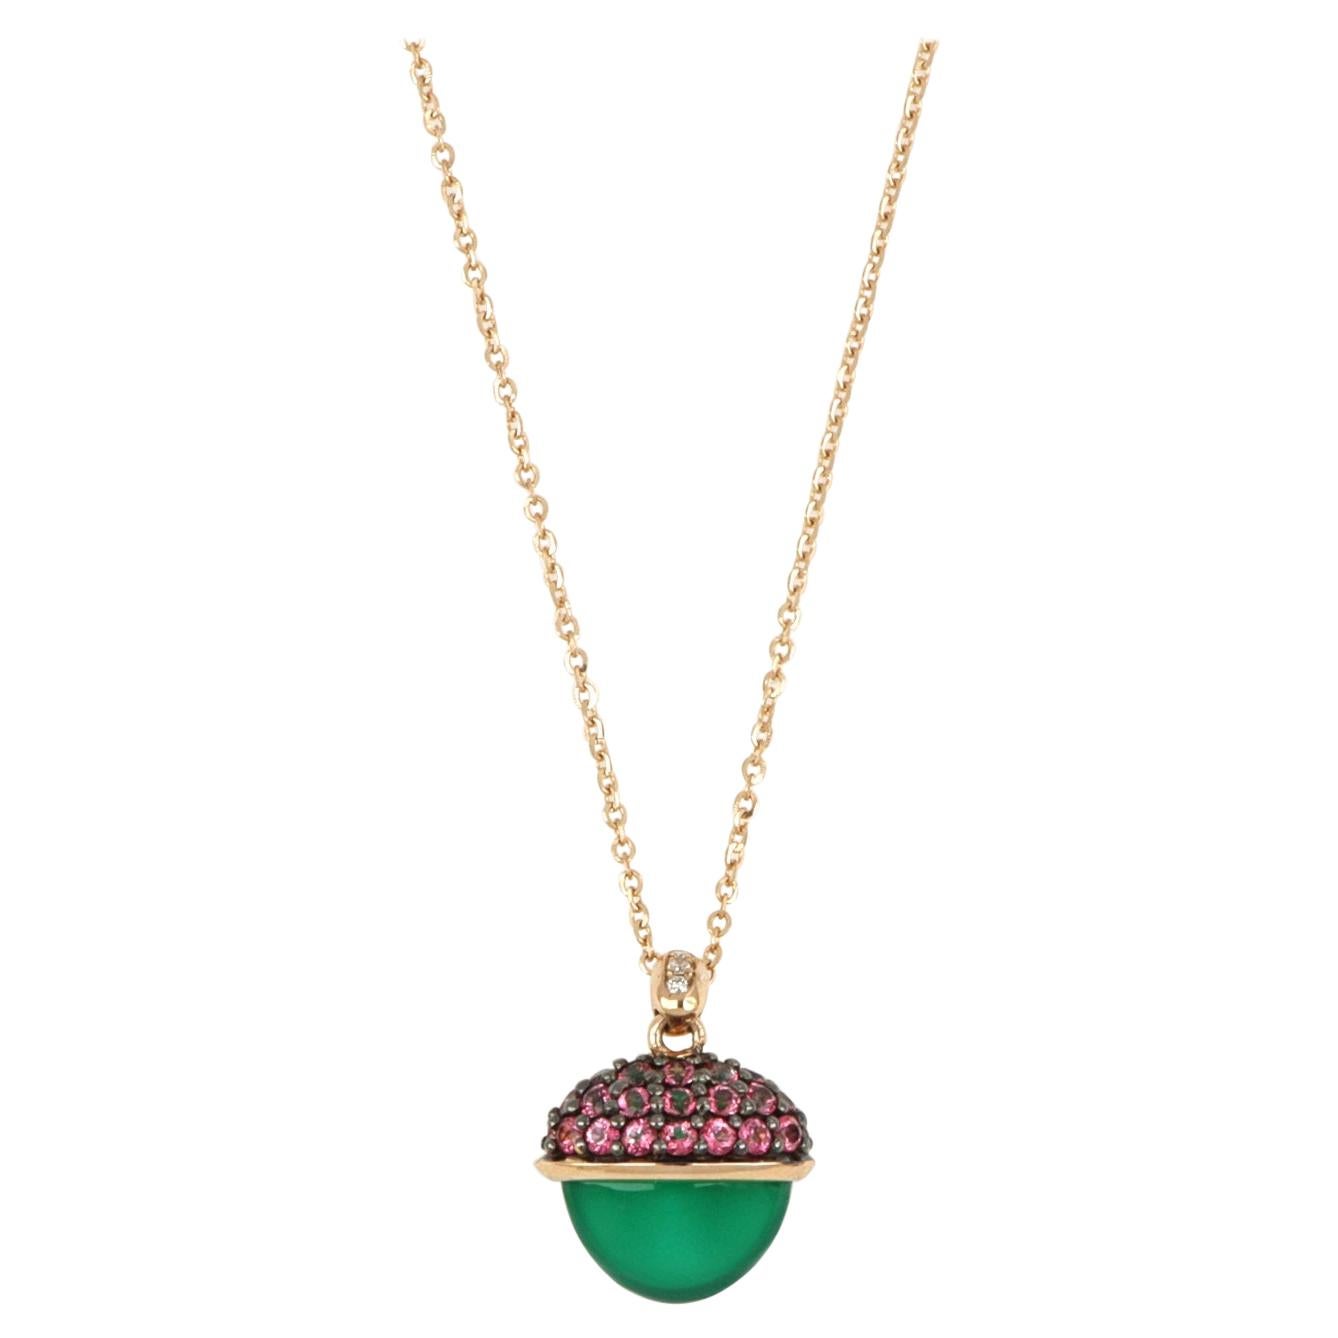 18kt Rose Gold Les Bois Necklace with Green Onix and Pink Topazes